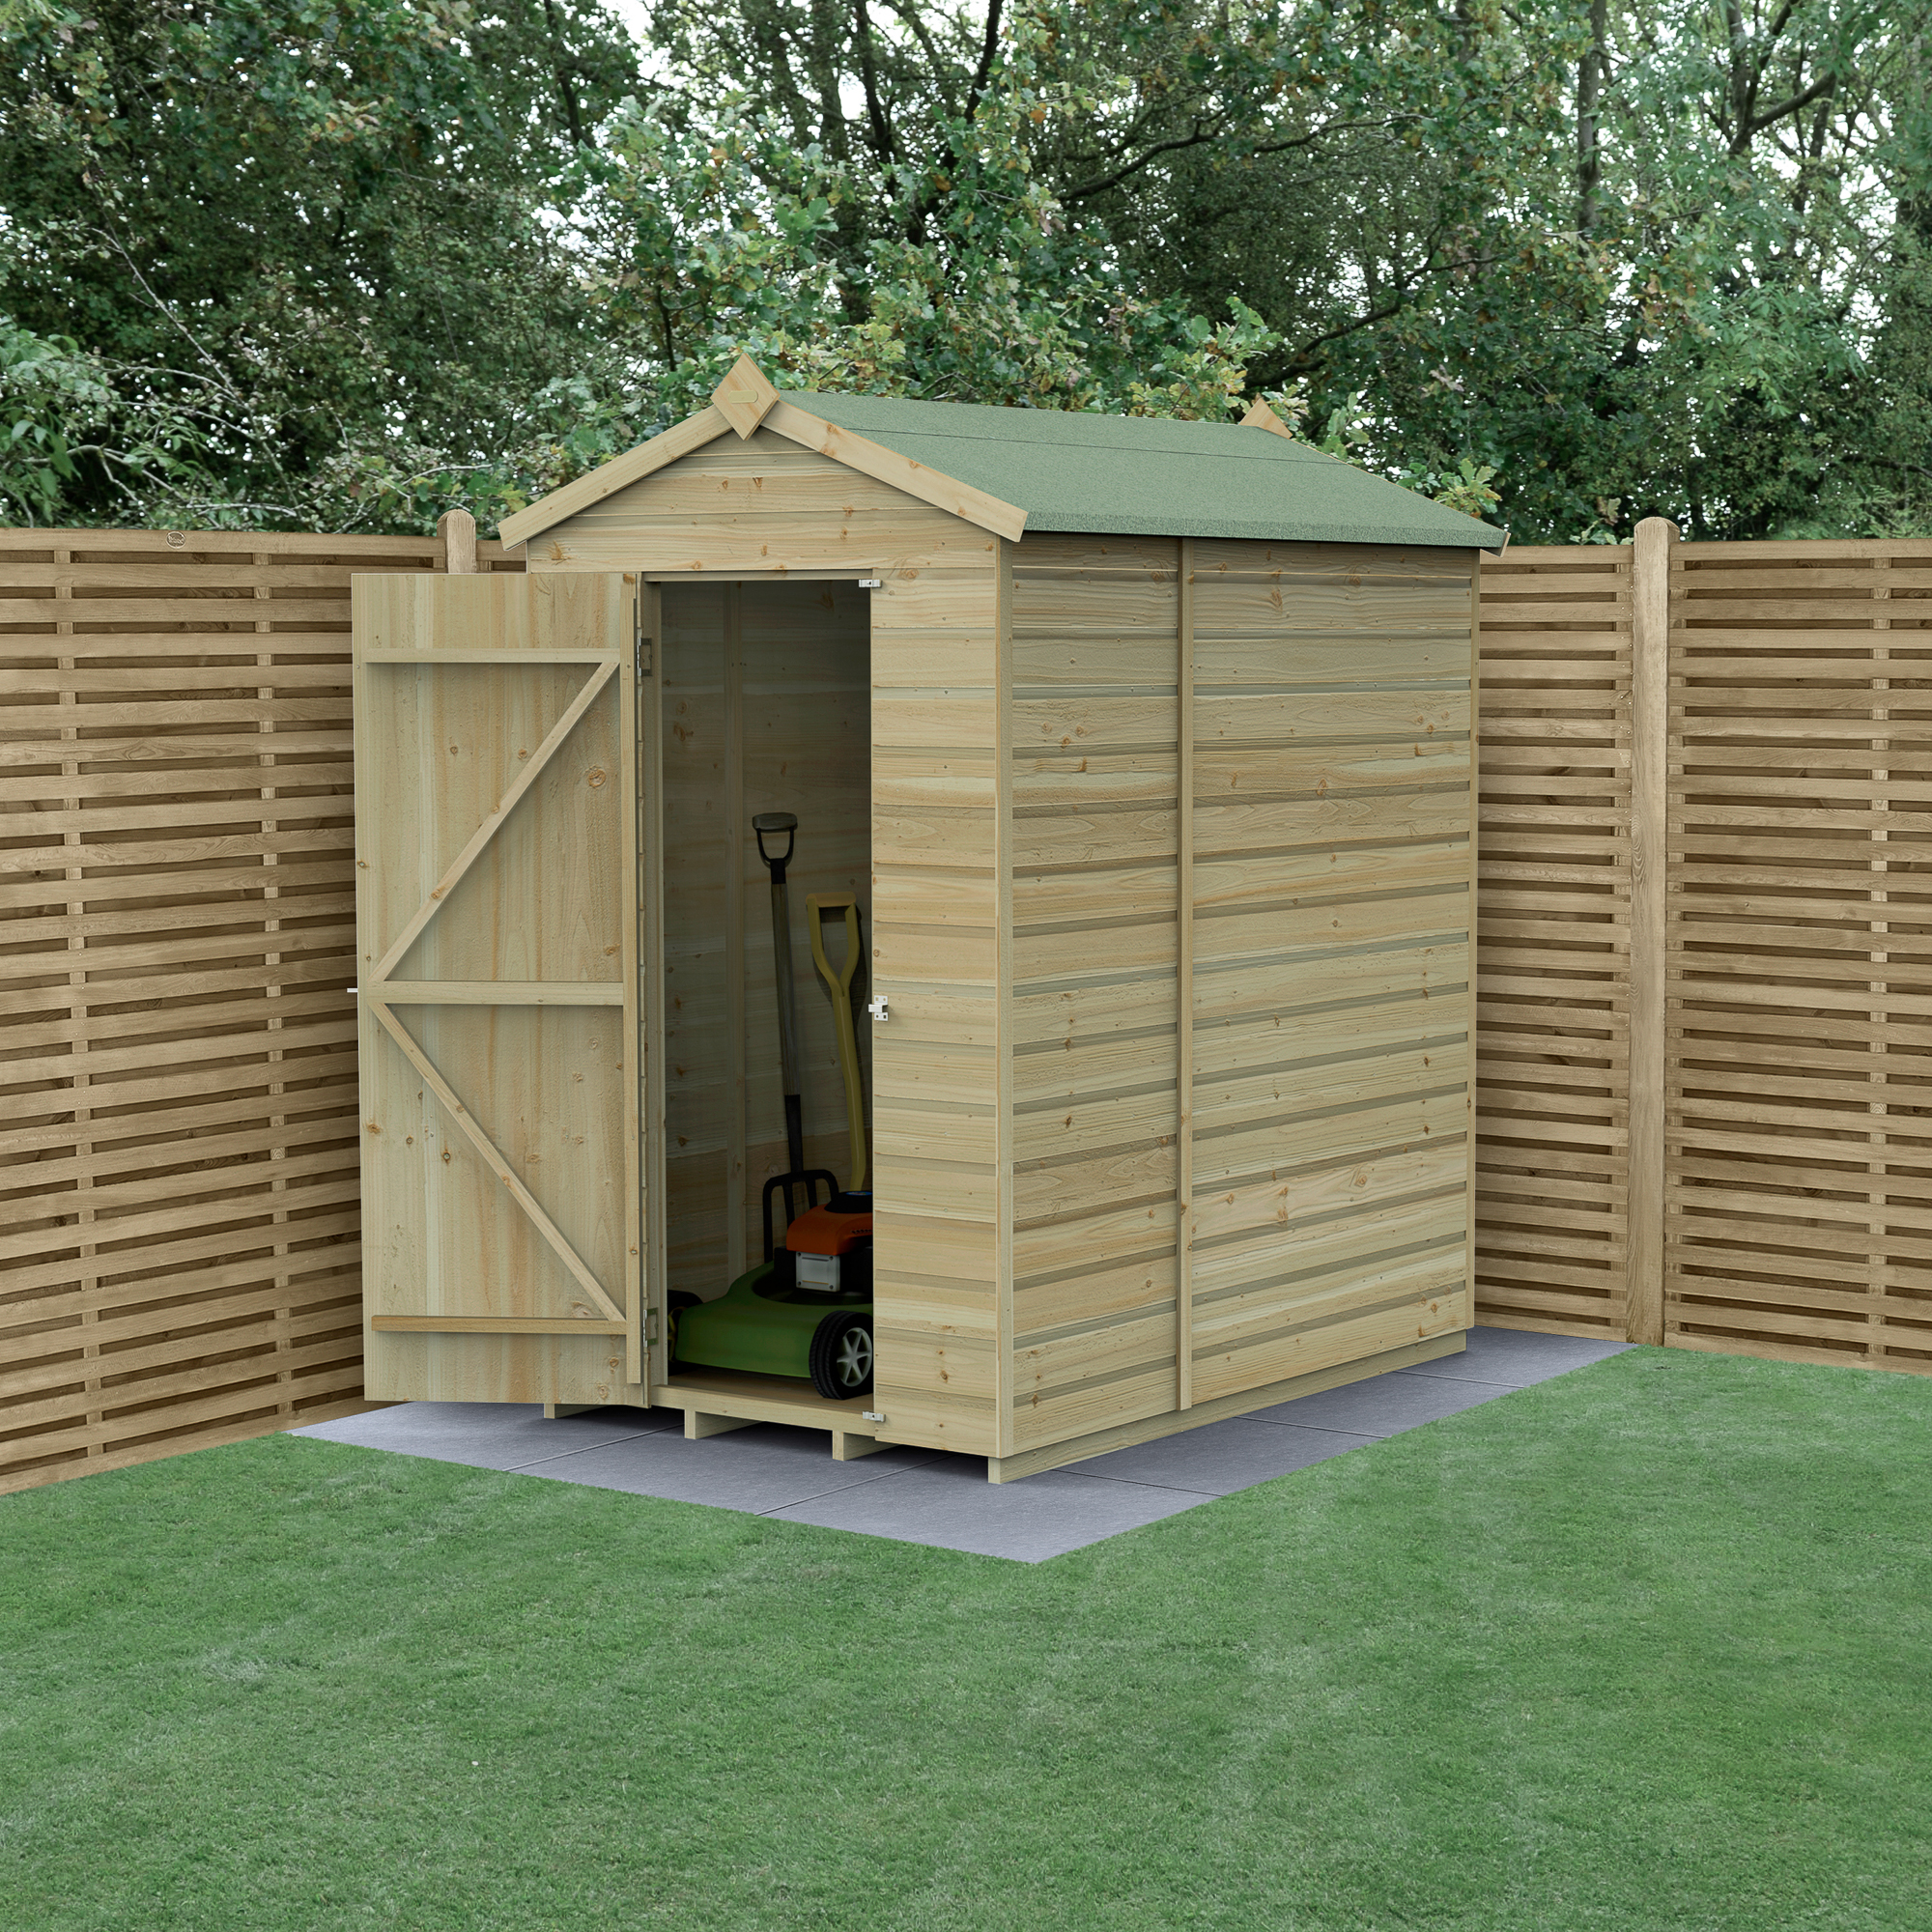 Forest Garden Beckwood 4 x 6ft Apex Shiplap Pressure Treated Windowless Shed